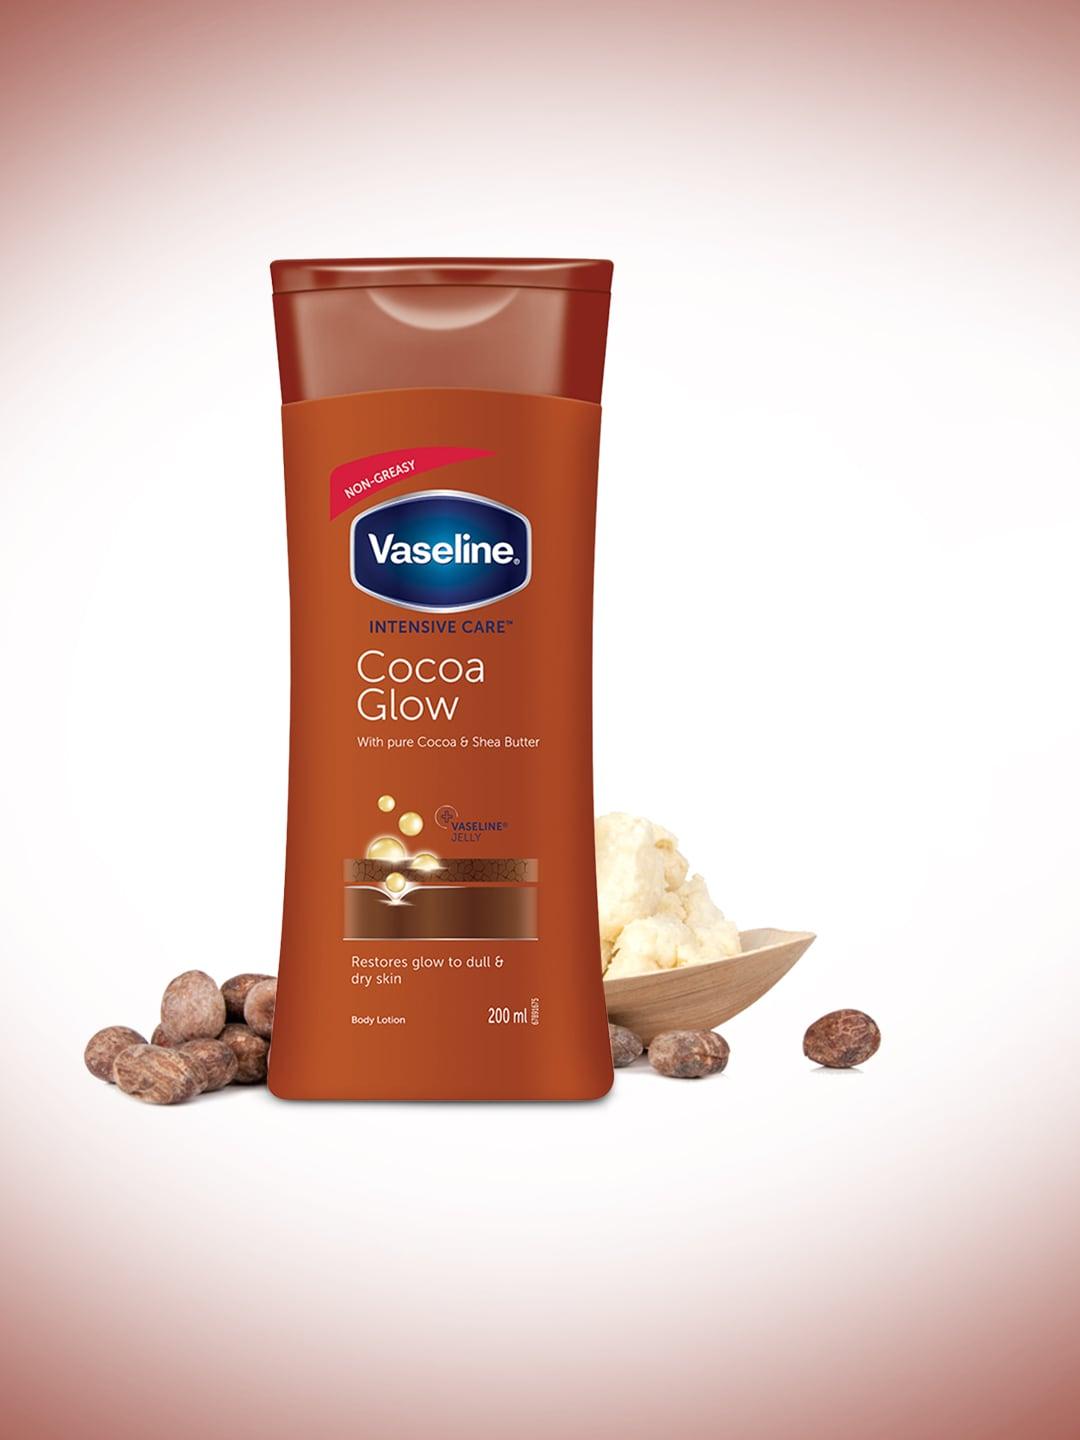 Vaseline Intensive Care Cocoa Glow Body Lotion with Glycerin 200 ml